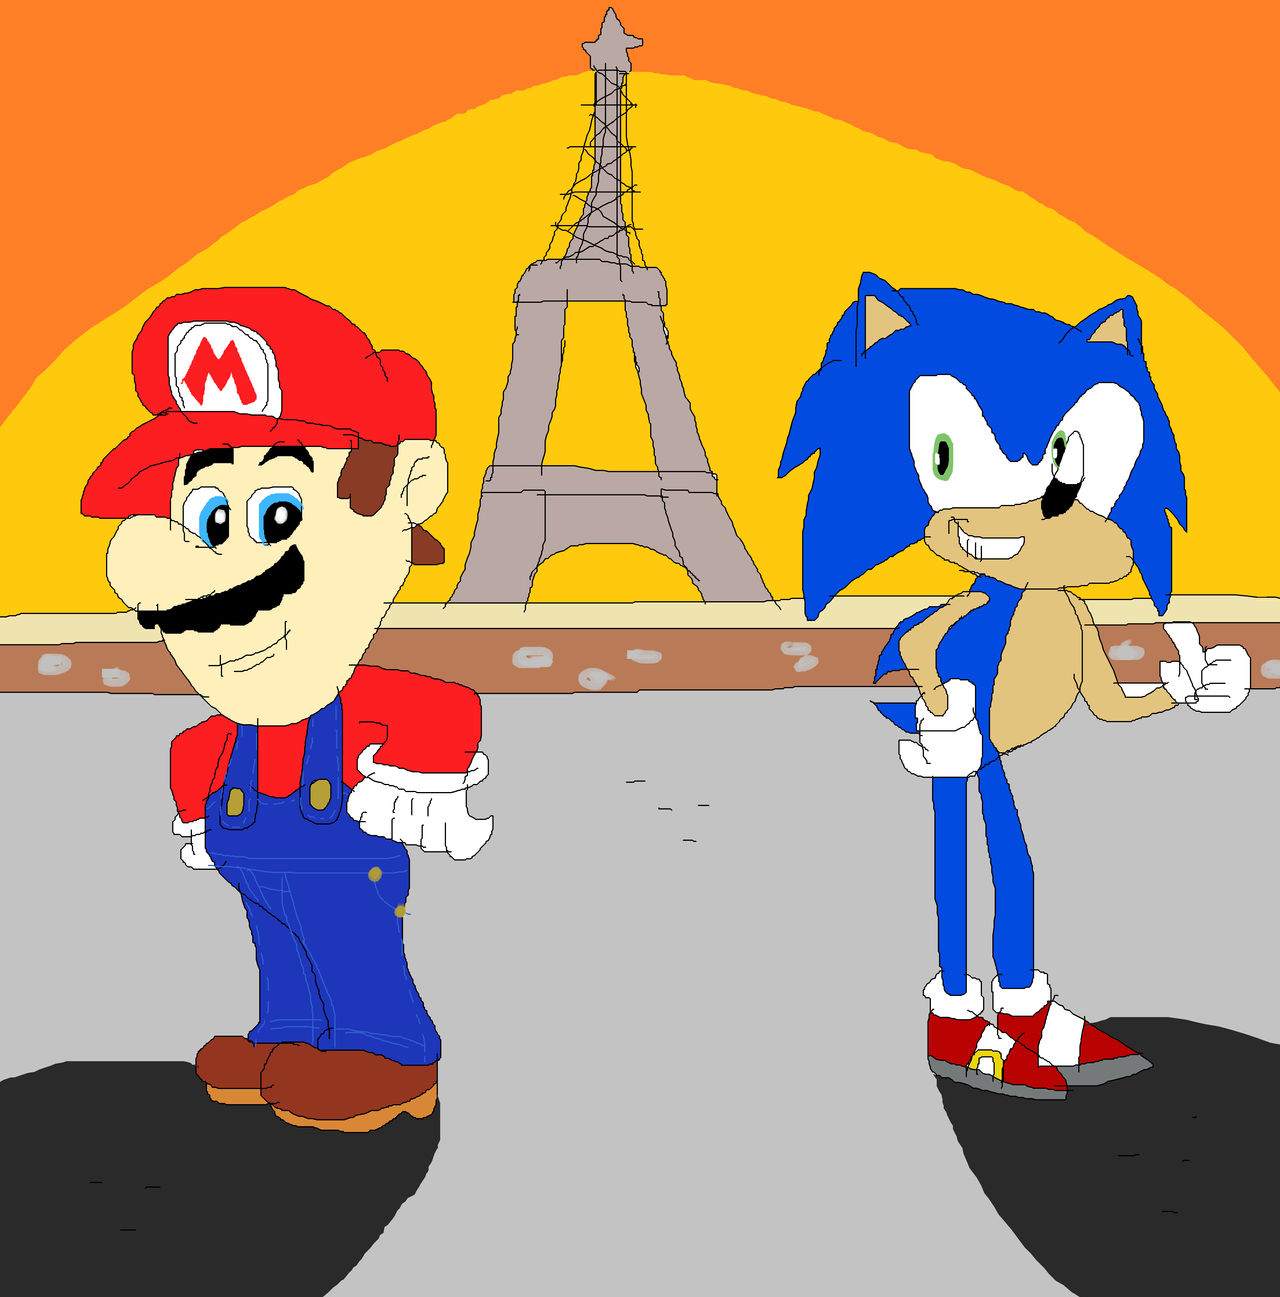 Mario and Sonic at the Paris 2024 Olympic Games by sergi1995 on DeviantArt